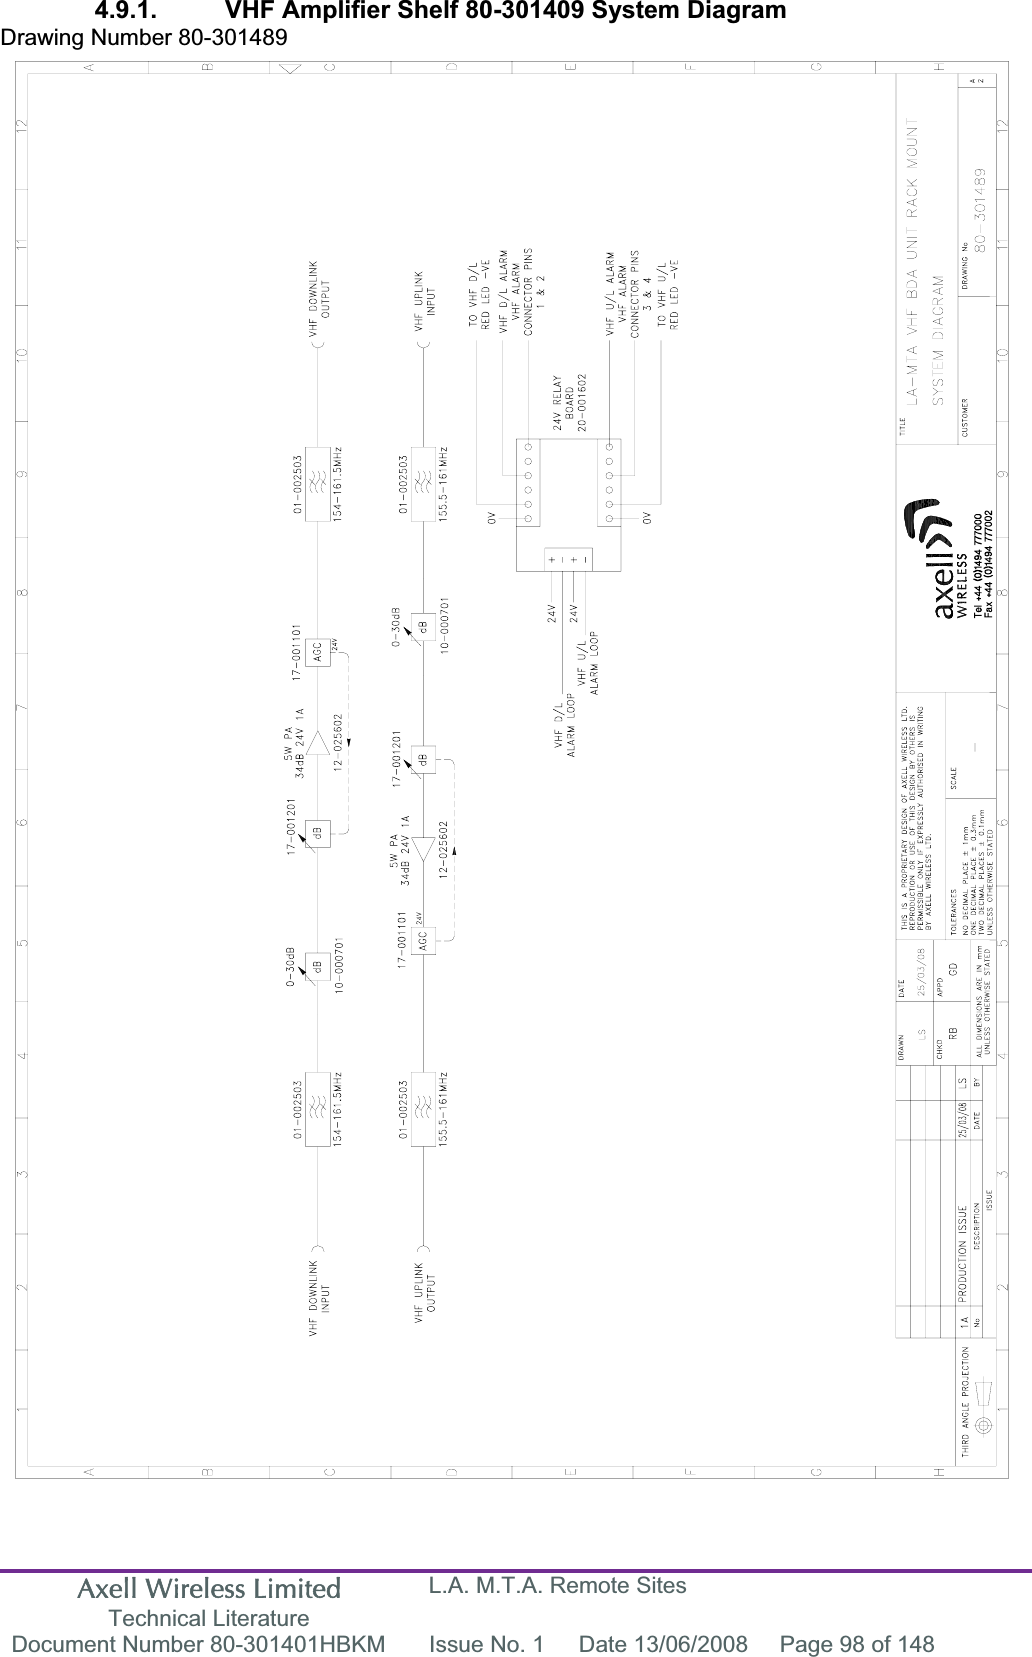 Axell Wireless Limited Technical Literature L.A. M.T.A. Remote Sites Document Number 80-301401HBKM  Issue No. 1  Date 13/06/2008  Page 98 of 148 4.9.1.  VHF Amplifier Shelf 80-301409 System Diagram  Drawing Number 80-301489 